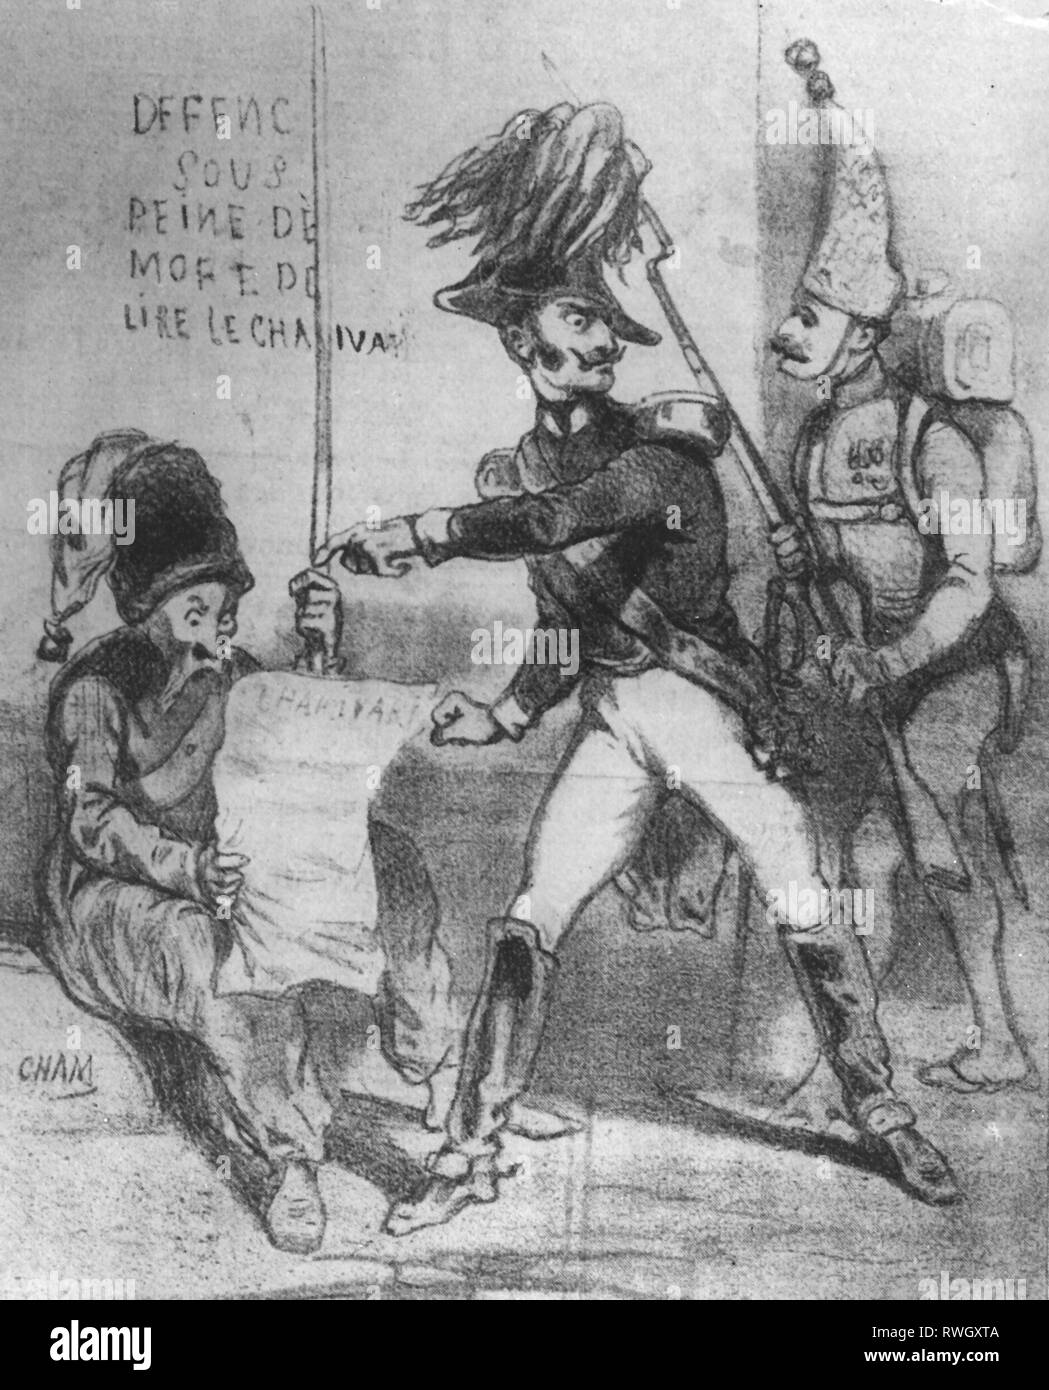 Nicholas I Pavlovich, 6.7.1796 - 2.3.1855, emperor of Russia 19.11.1825 - 2.3.1855, half length, caricature, 'What! This cossack is reading a French paper?', drawing by Cham (1819 - 1879), from: 'Le Charivari', Paris, circa 1854, France, czar, Romanov, Holstein-Gottorp, Holstein - Gottorp, Romanow-Holstein-Gottorp, graphic, humor, satire, press / media, freedom of the press / media, censorship, ban, standing, standing, uniform, plume hat, soldier, Cossack, reading, reading, newspaper, Artist's Copyright has not to be cleared Stock Photo